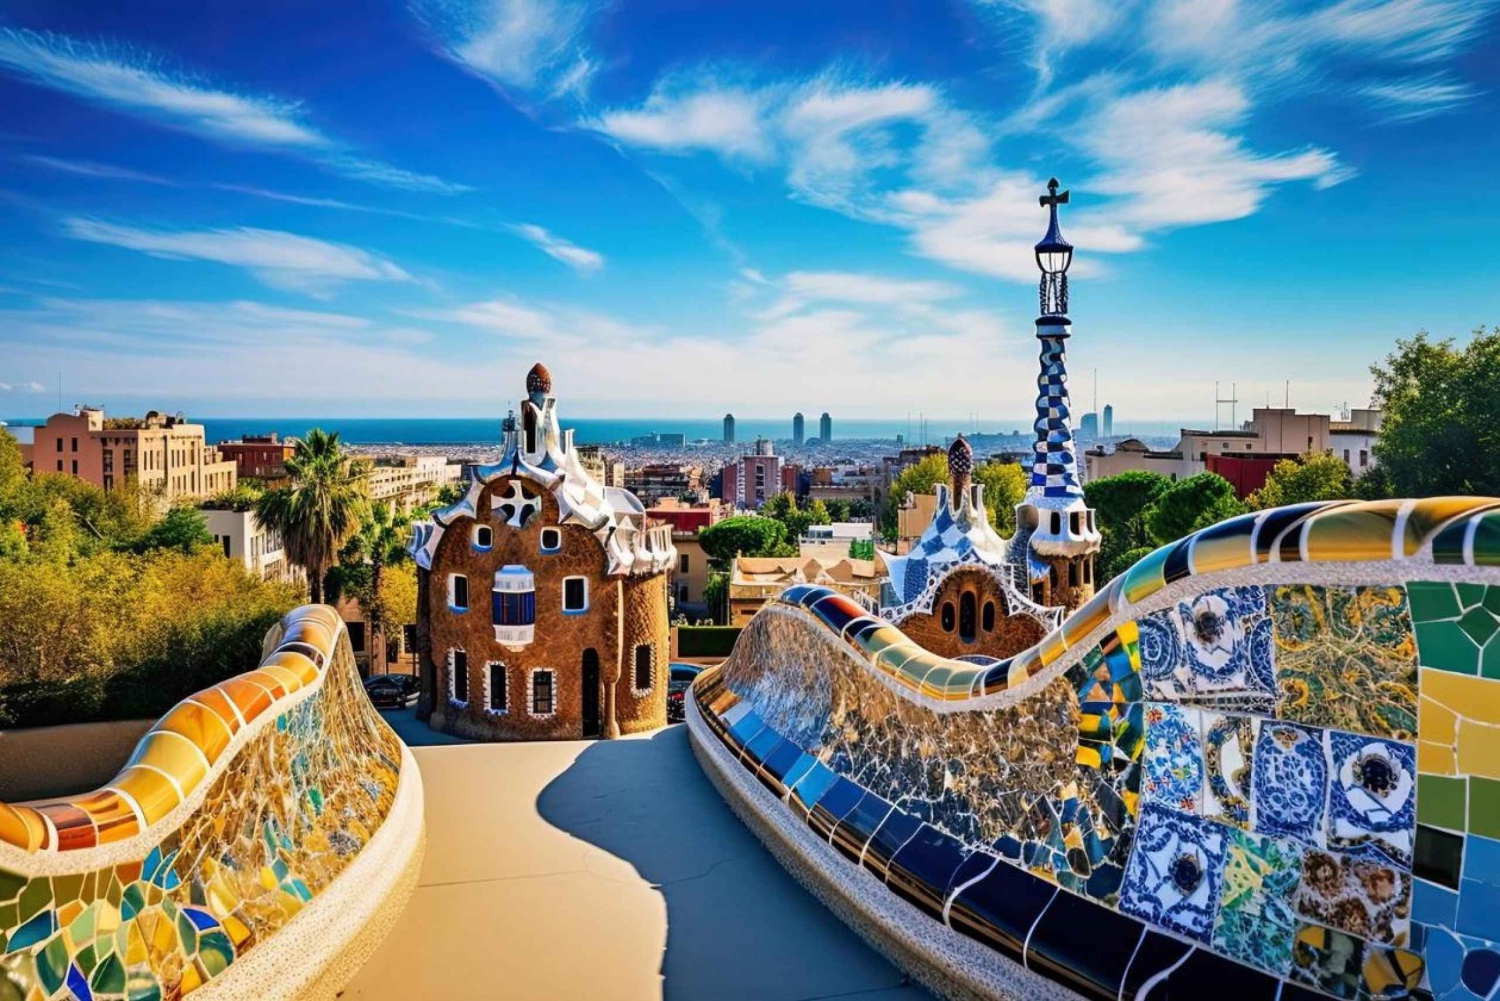 Barcelona: Capture the most Photogenic Spots with a Local